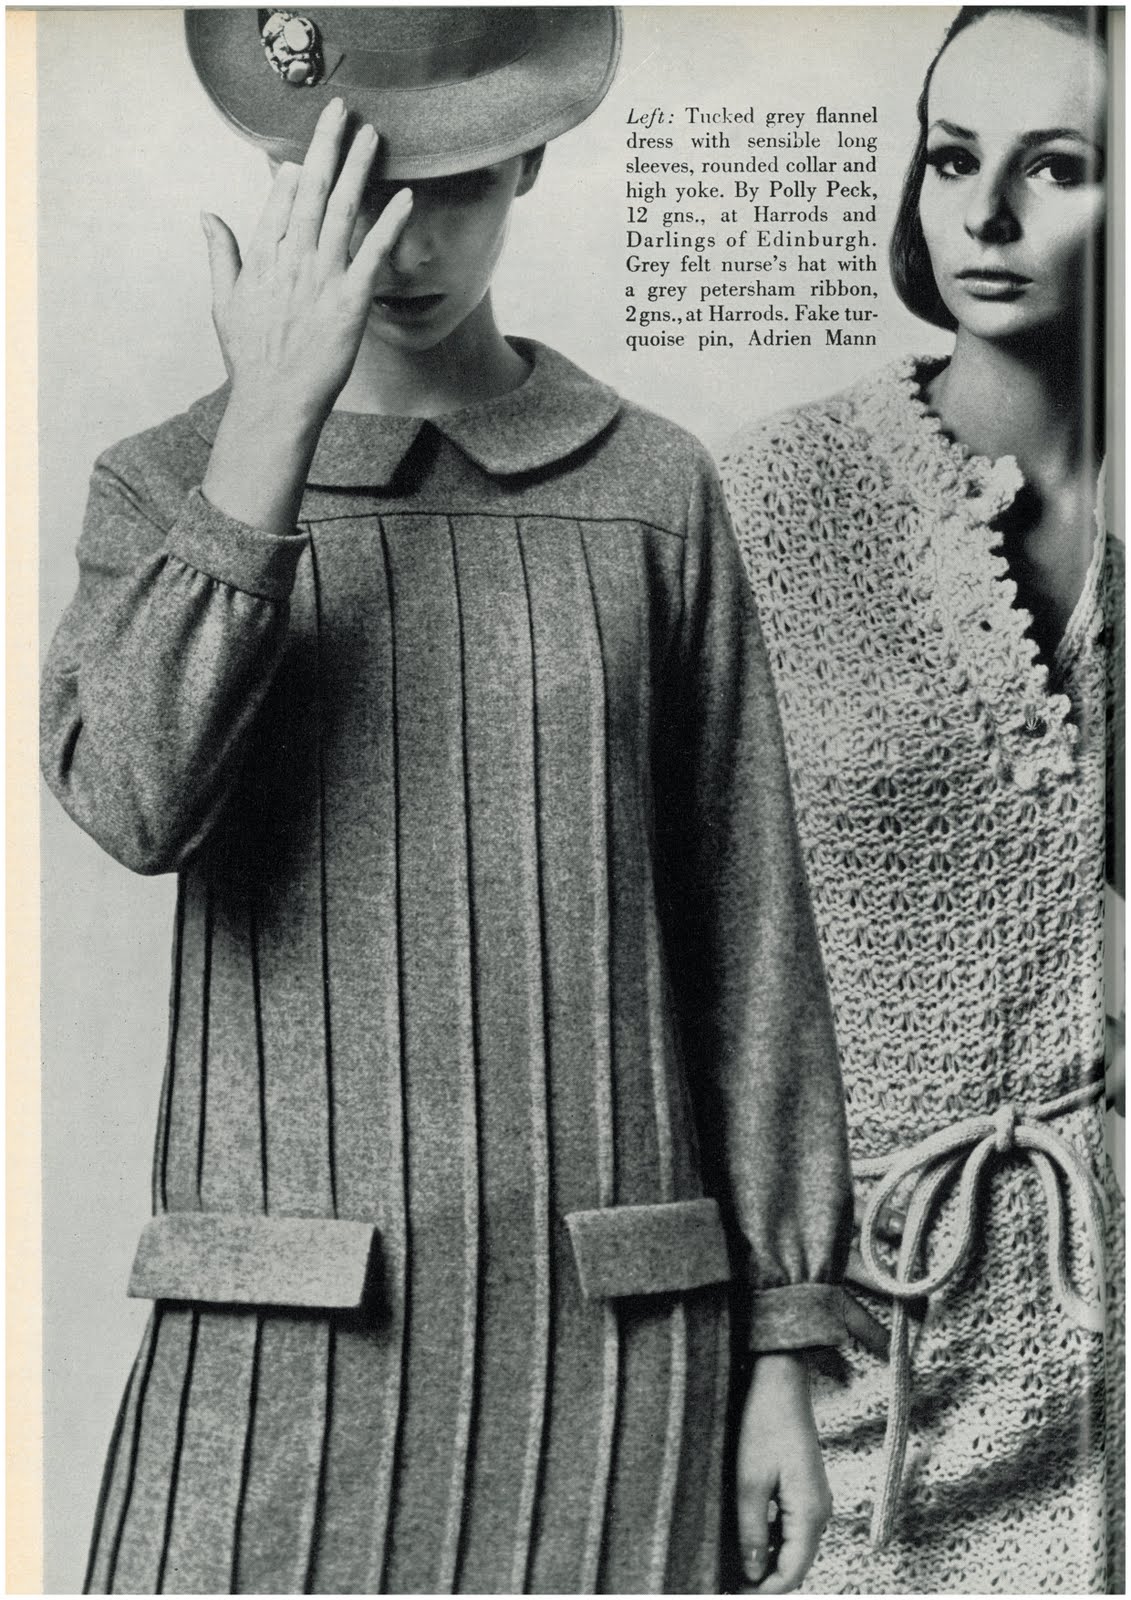 youthquakers: January 1st 1965 - UK Vogue